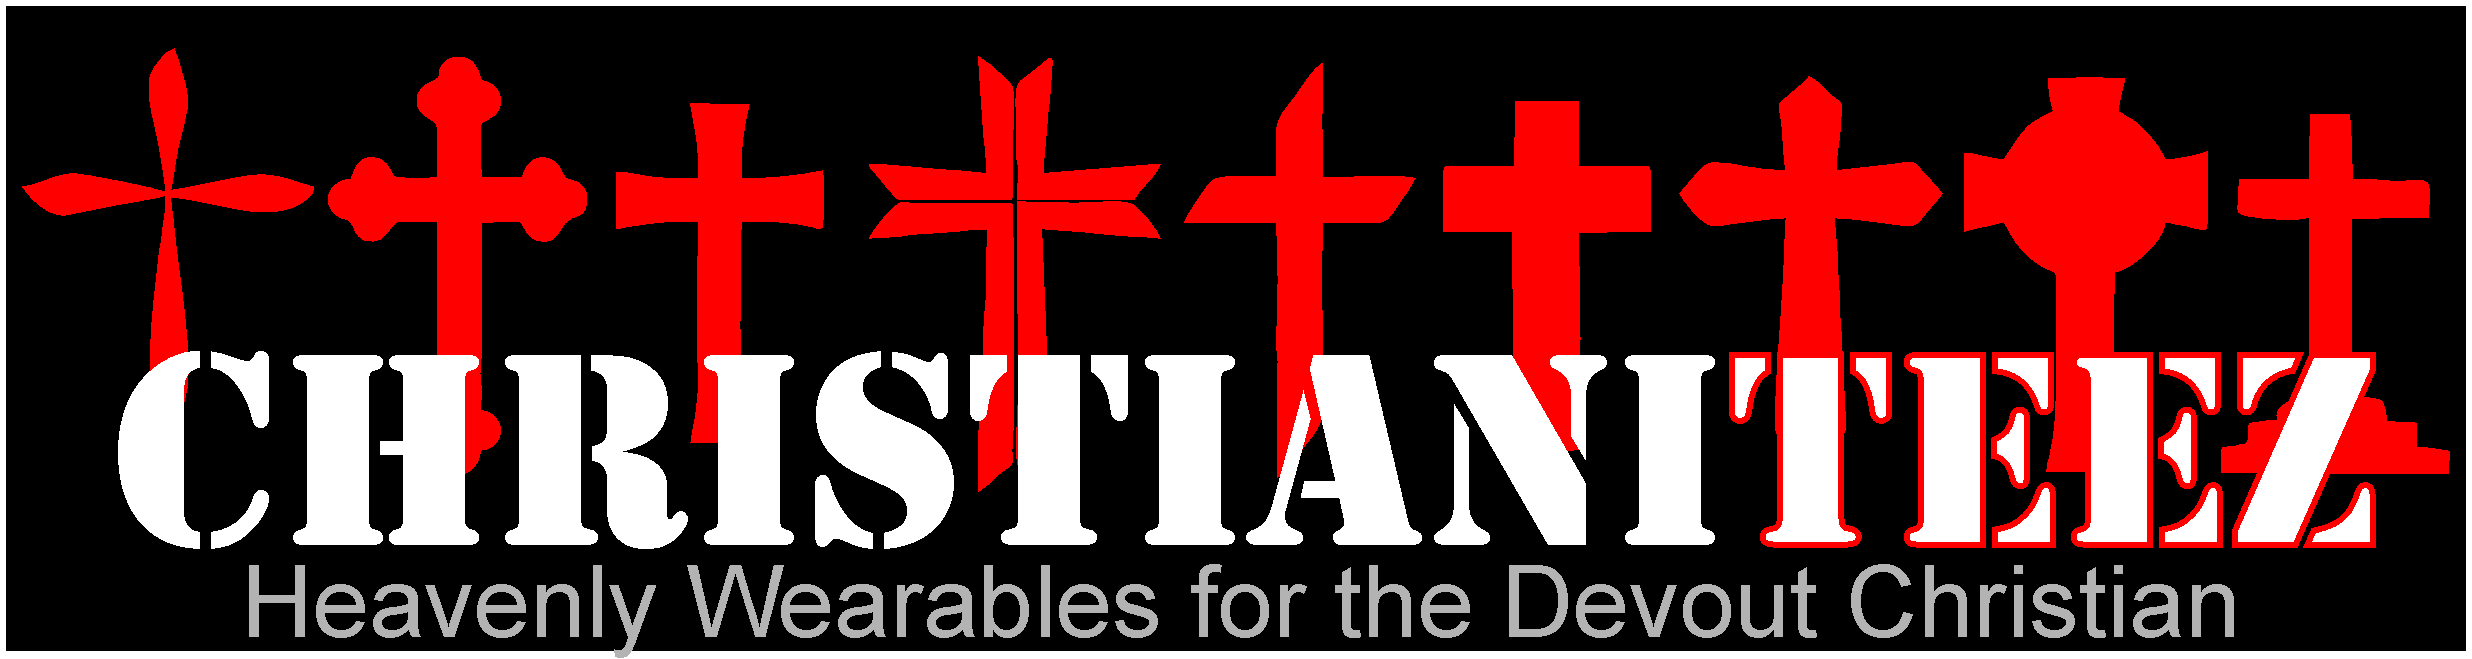 Our newest line of wearables has now launched. #ChristianiTEEZ offers an assortment of religious-themed apparel suitable for daily wear or those special church functions. Check out the whole collection at https://teespring.com/stores/christianiteez  or click the link below.  #christian #biblical #psalms #religion #religious #church #cross #crucifix #christianity #jesus 